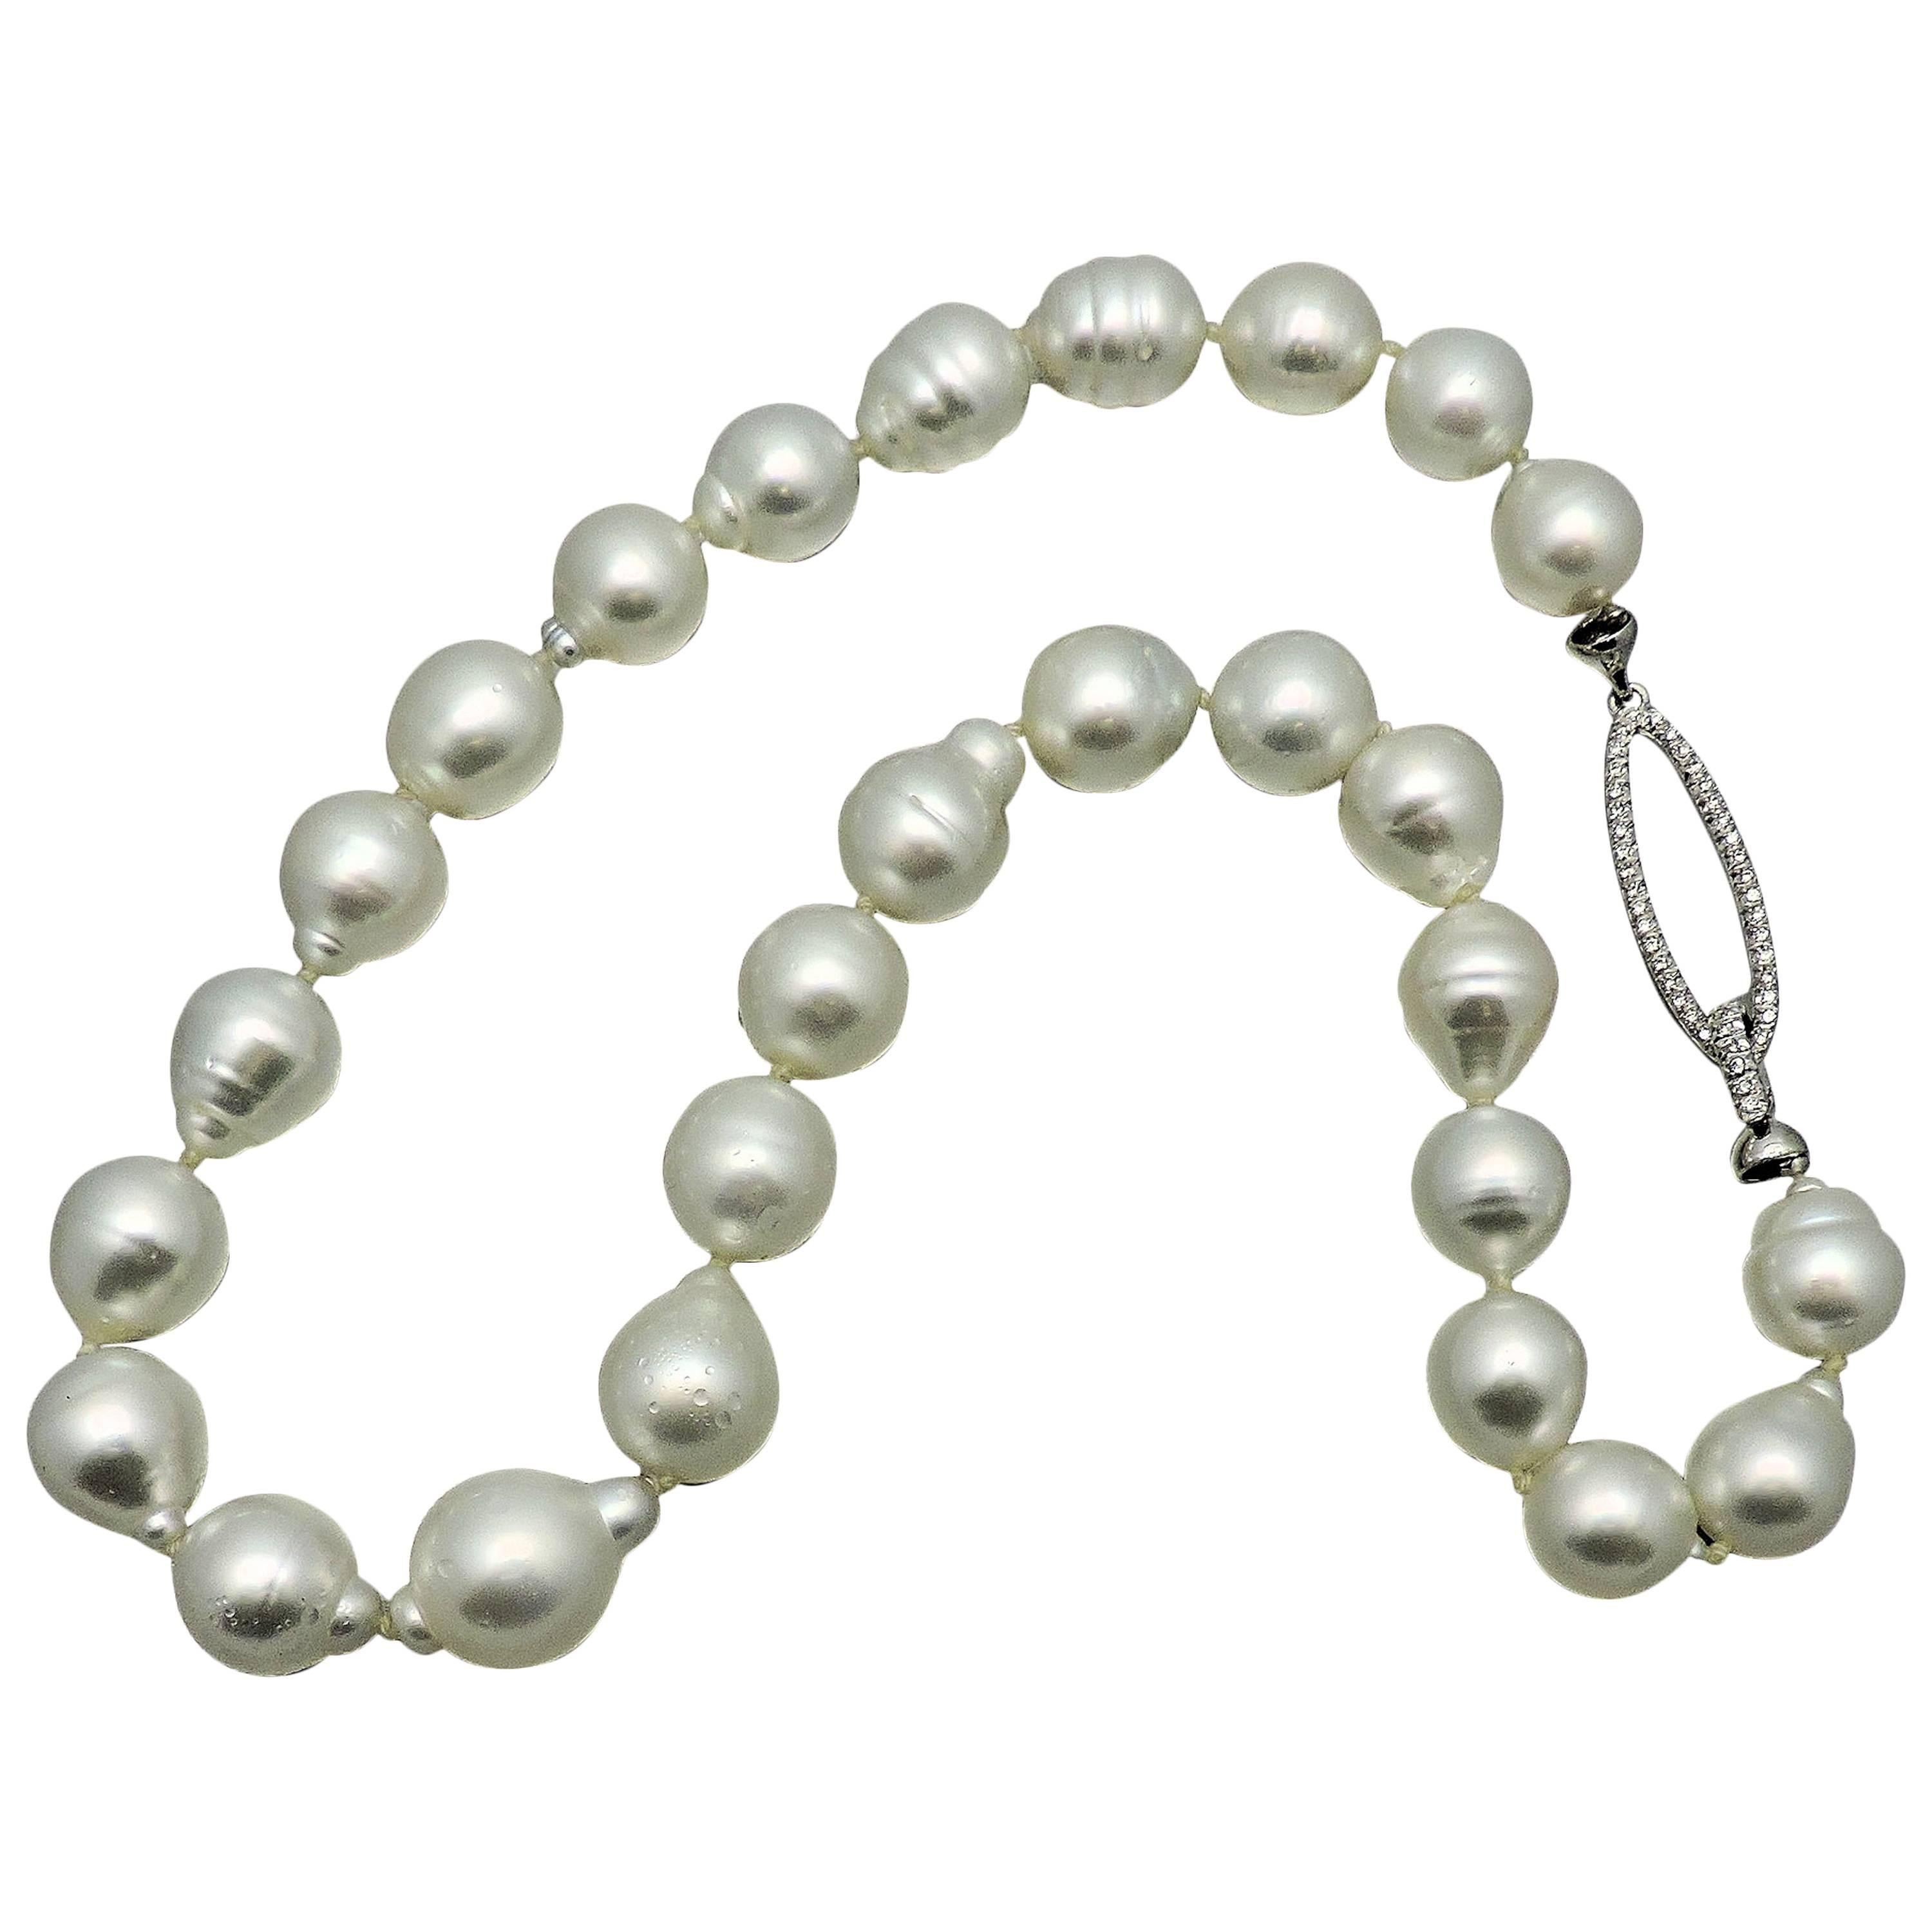 Elegant Baroque South Sea Cultured Pearls with Diamond Clasp For Sale